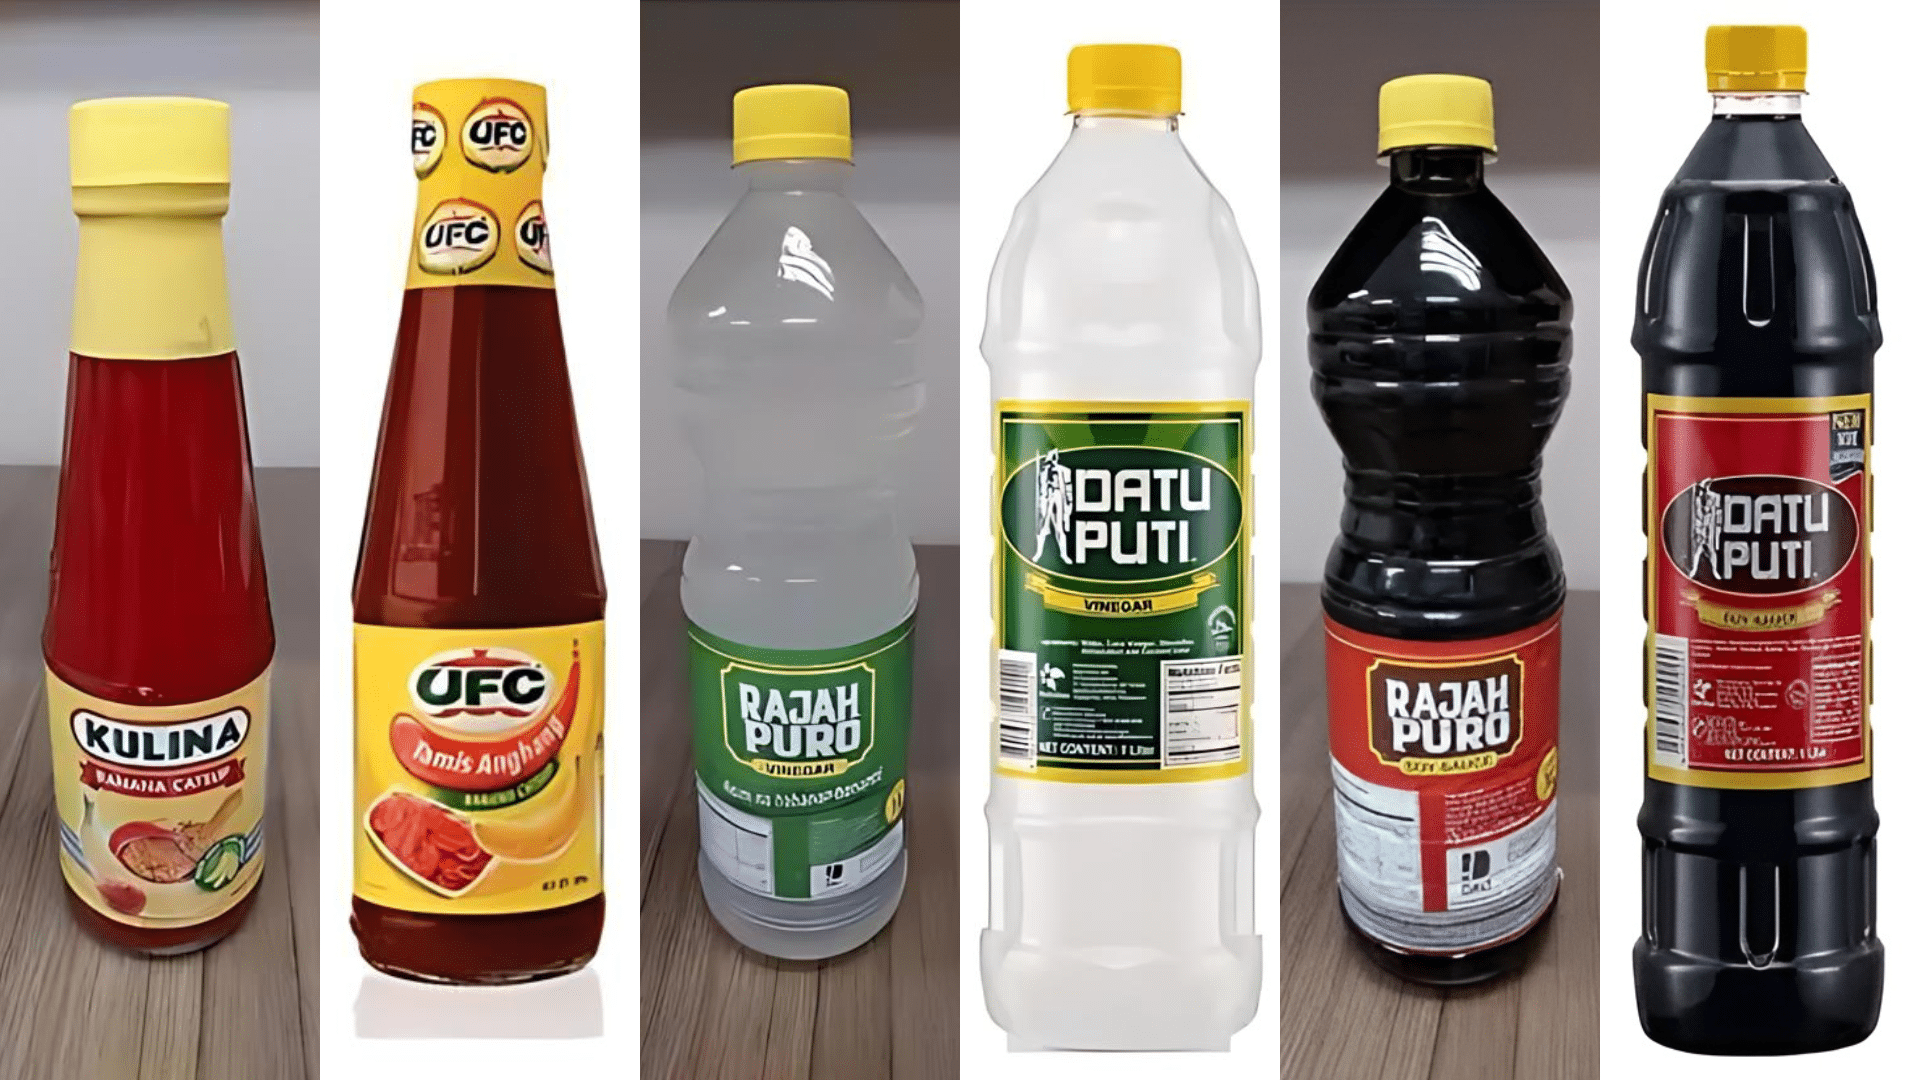 The case stems from the Dali selling Kulina catsup and chili sauce, and Rajah Puro vinegar and soy sauce in packaging confusingly similar to Nutri-Asia’s popular household brands UFC and Datu Puti products. (Photo from law firm Cruz Marcelo &amp; Tenefrancia website)